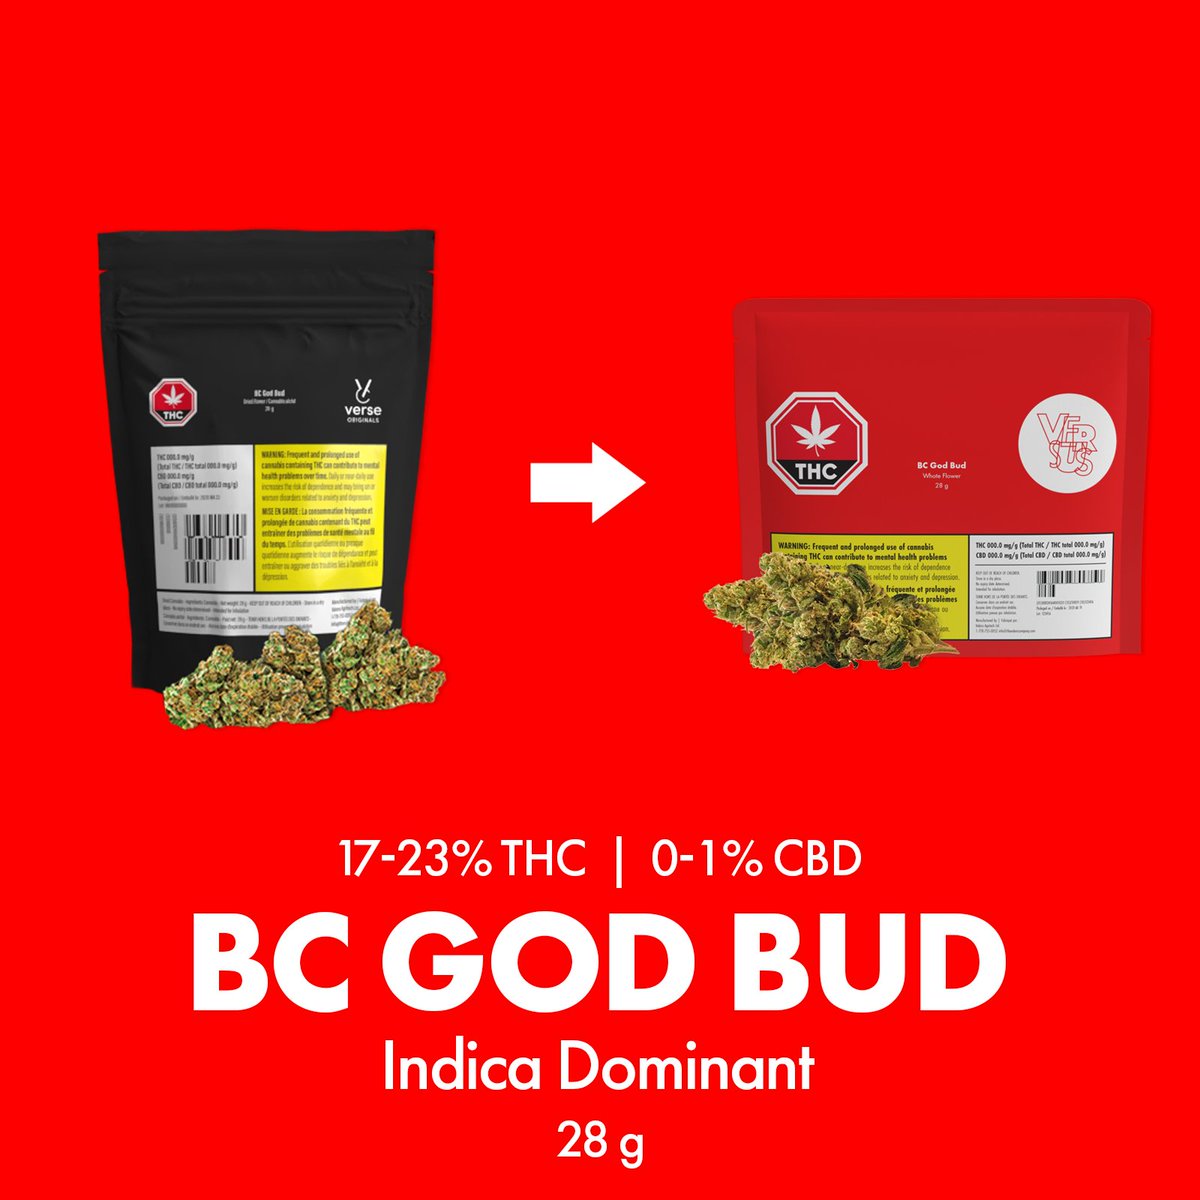 We’re expanding your 28 g picks! BC God Bud is now part of the Versus team, joining Super Lemon Haze for a high THC, Indica and Sativa duo! 💥

Available NOW in AB 
Coming to ON + BC markets SOON!

#VersusCannabis #canadiancannabis #cloudsovercanada #420canada